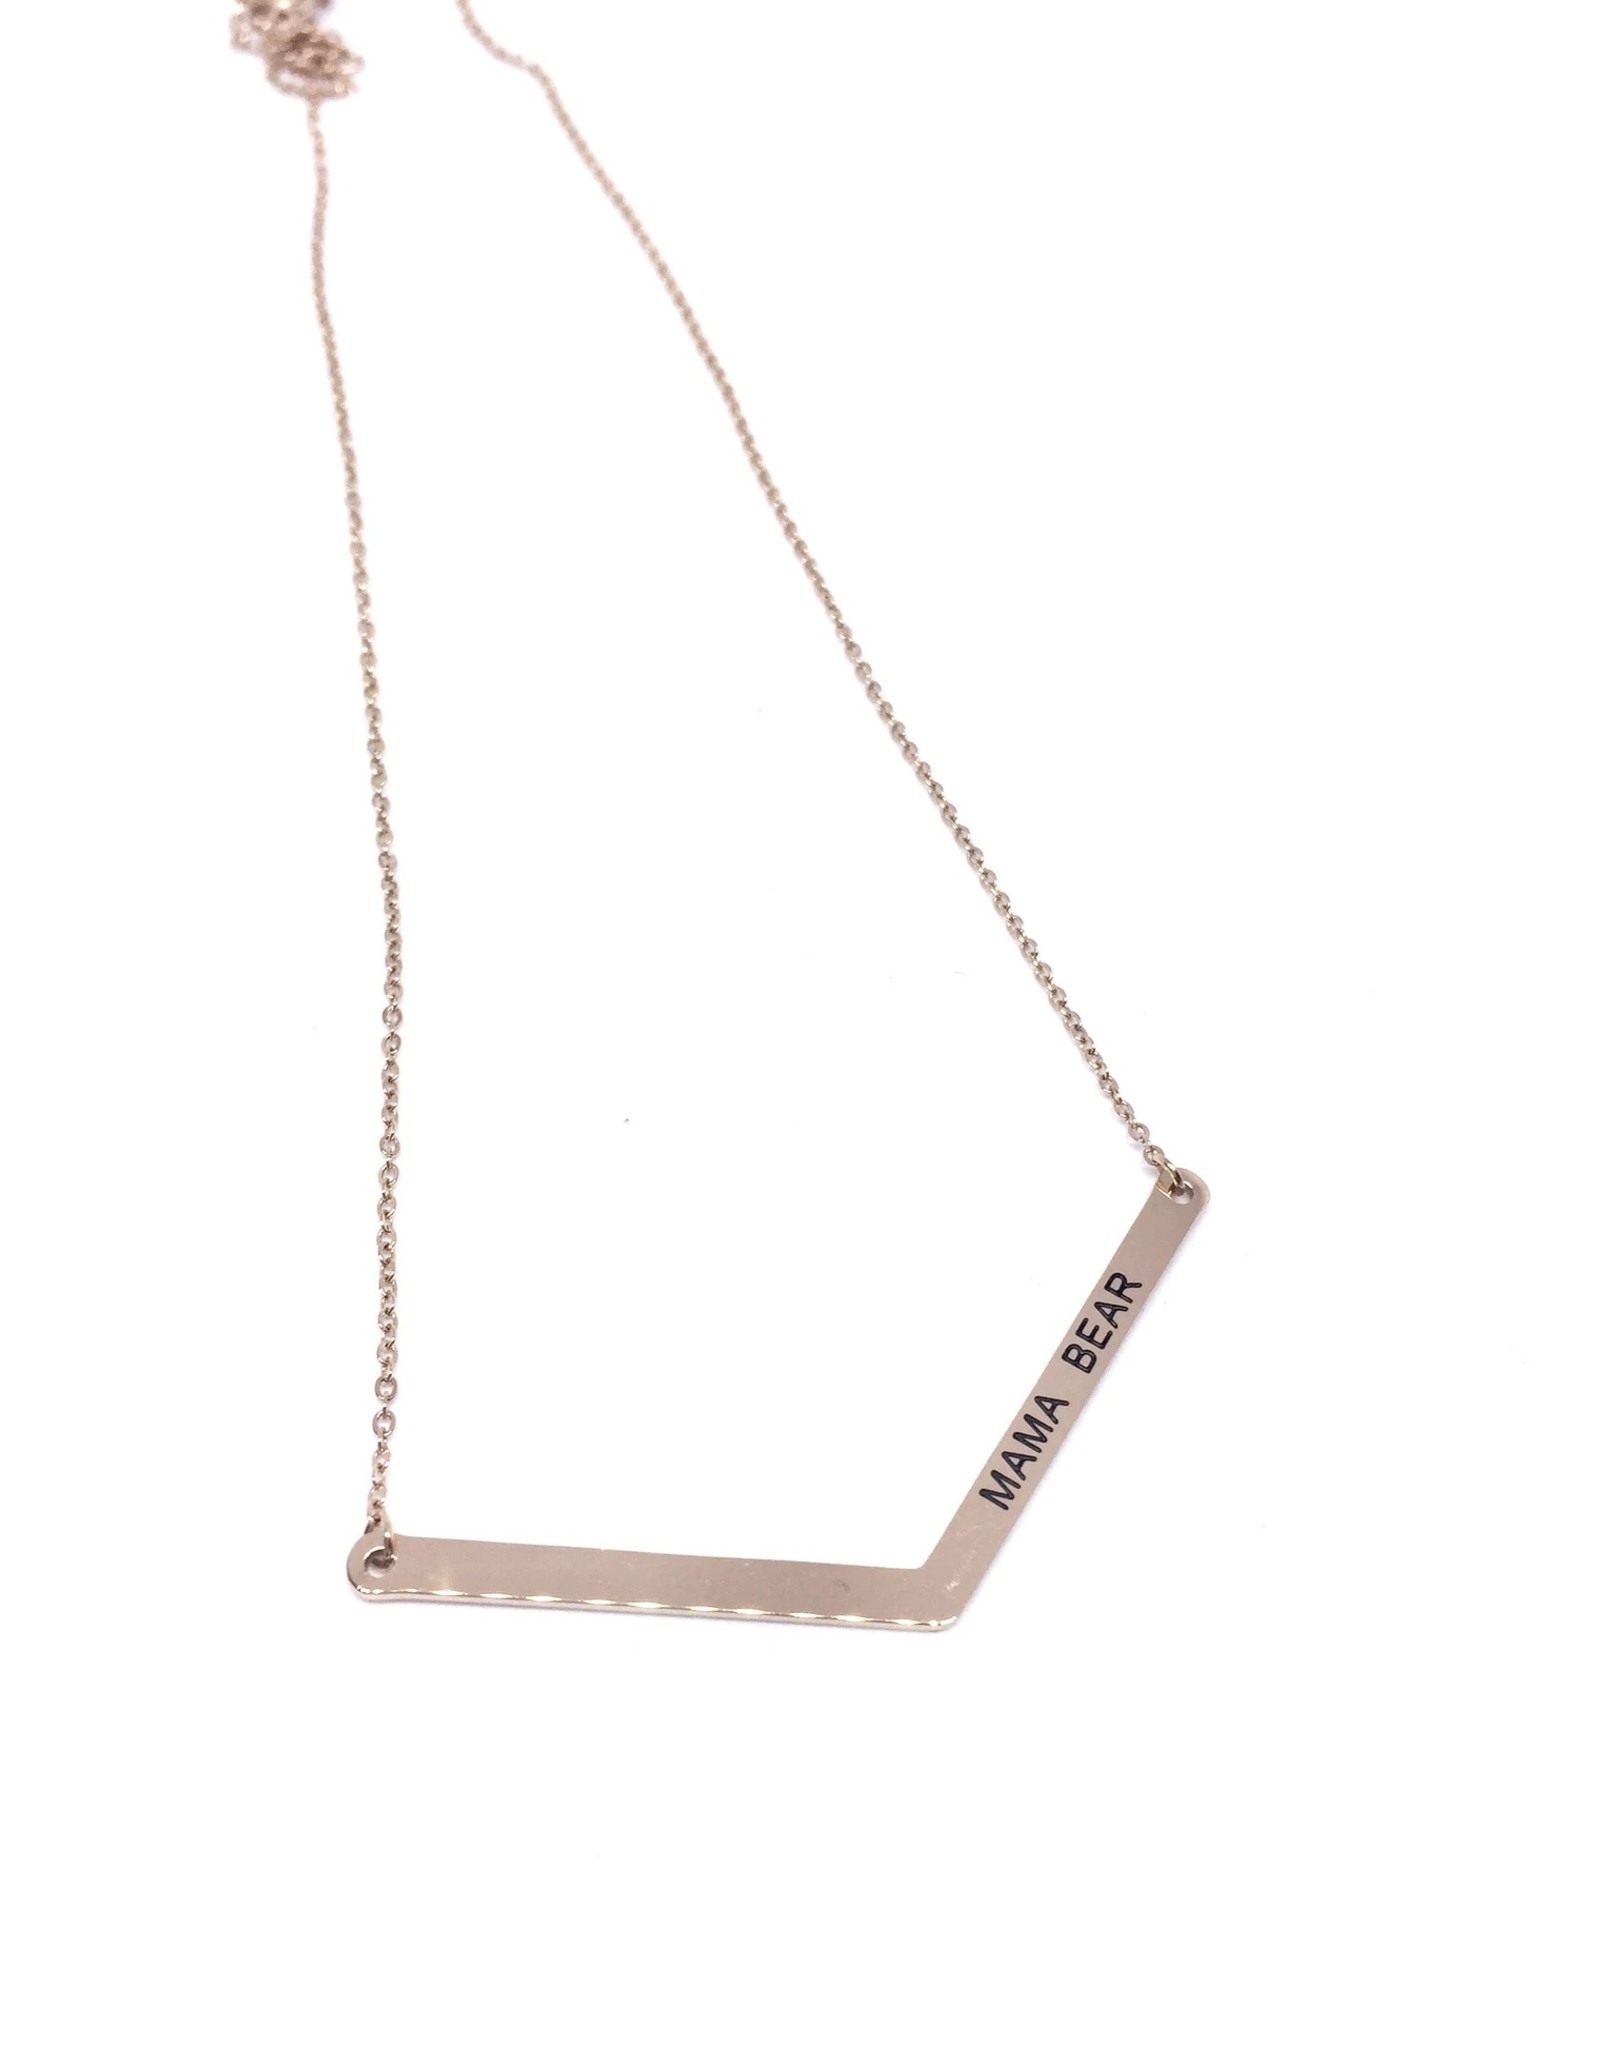 Glass House Goods Glass House Goods Rose Gold Necklace with Fun Sayings